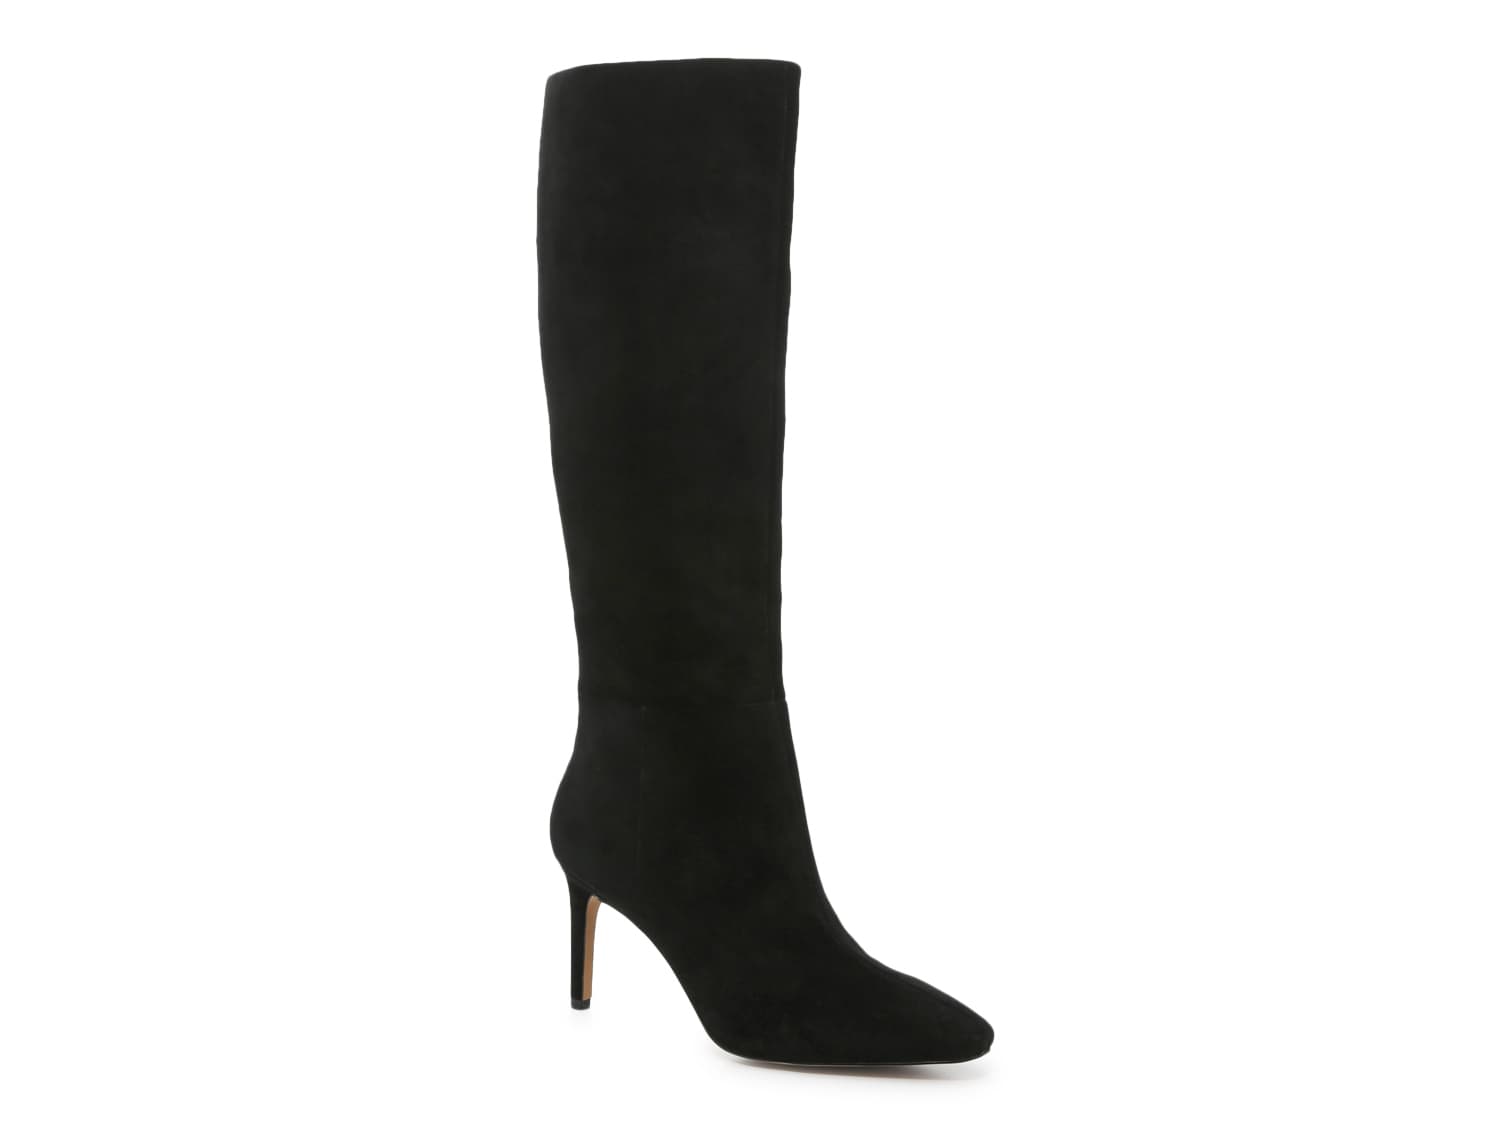 Vince Camuto Arendie Boot - Free Shipping | DSW